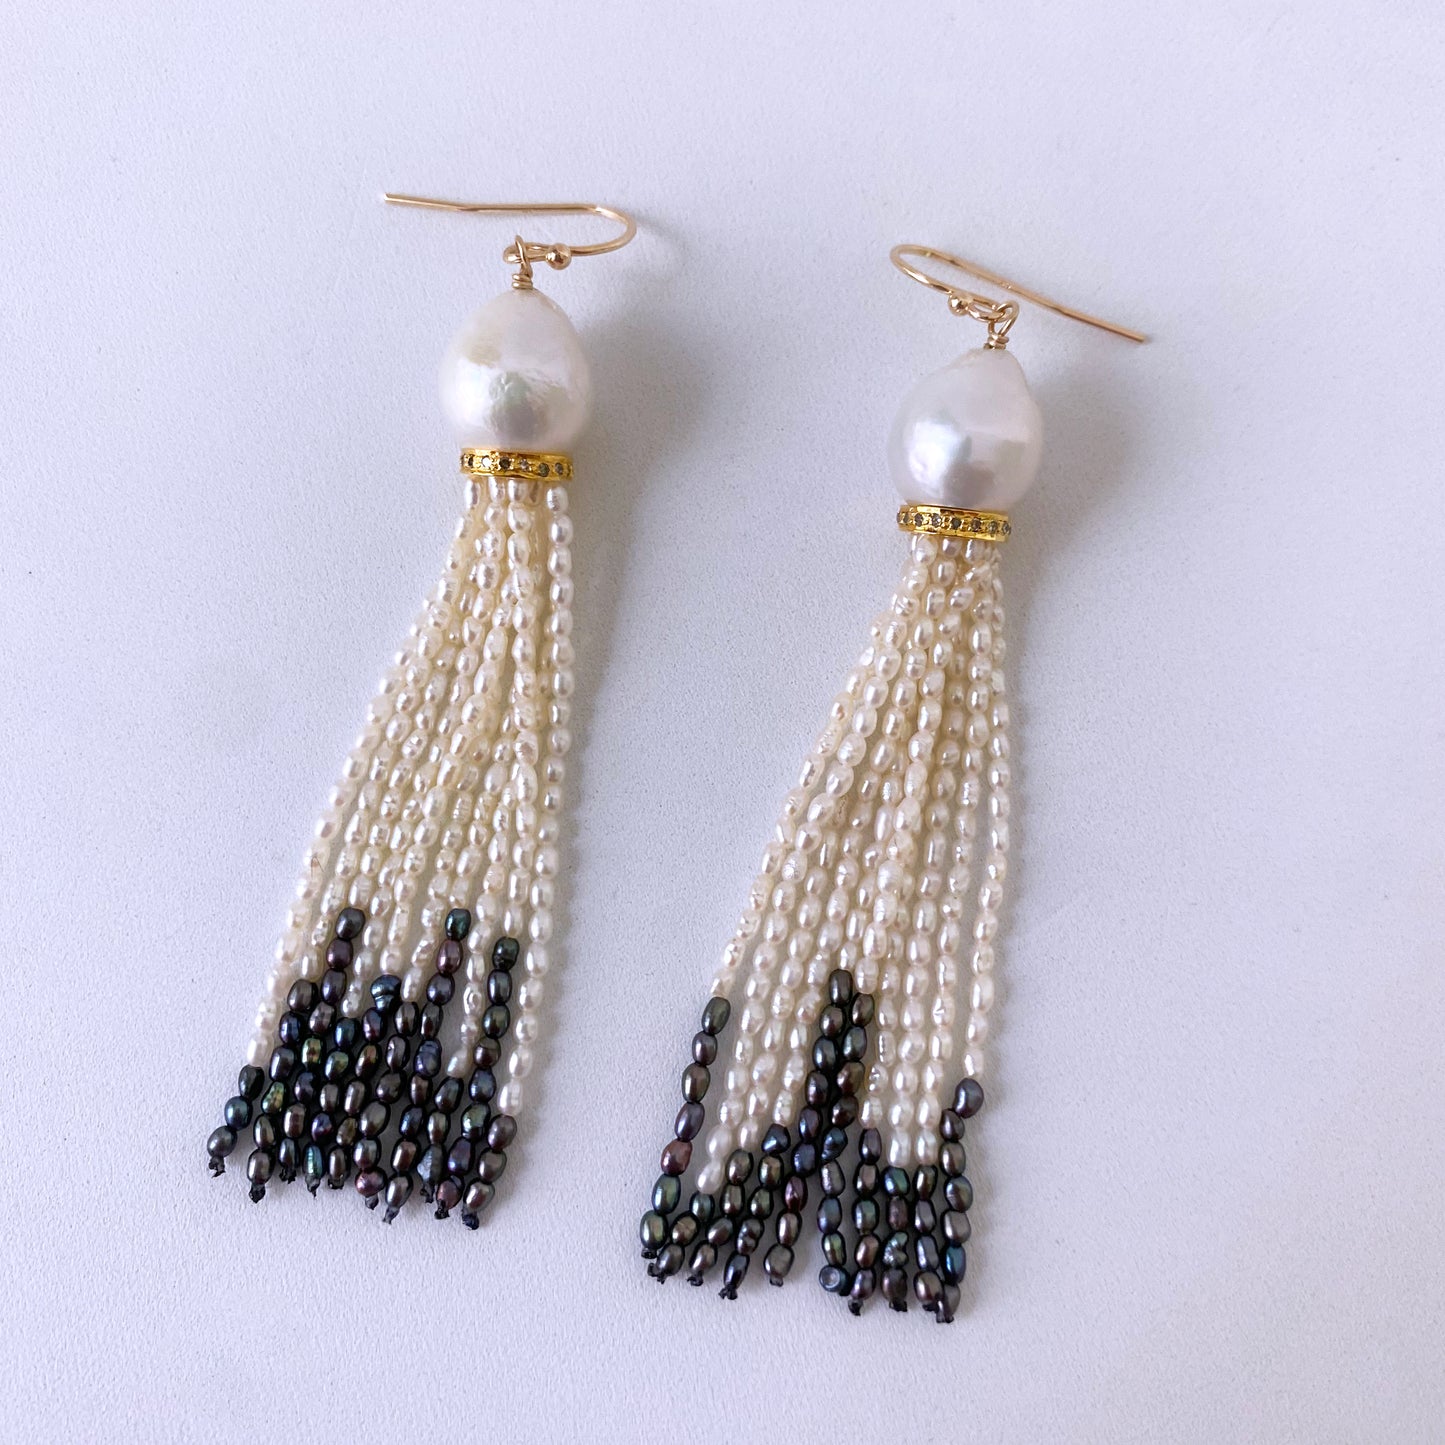 Solid 14k & Pearl Earrings with Ombre Tassels